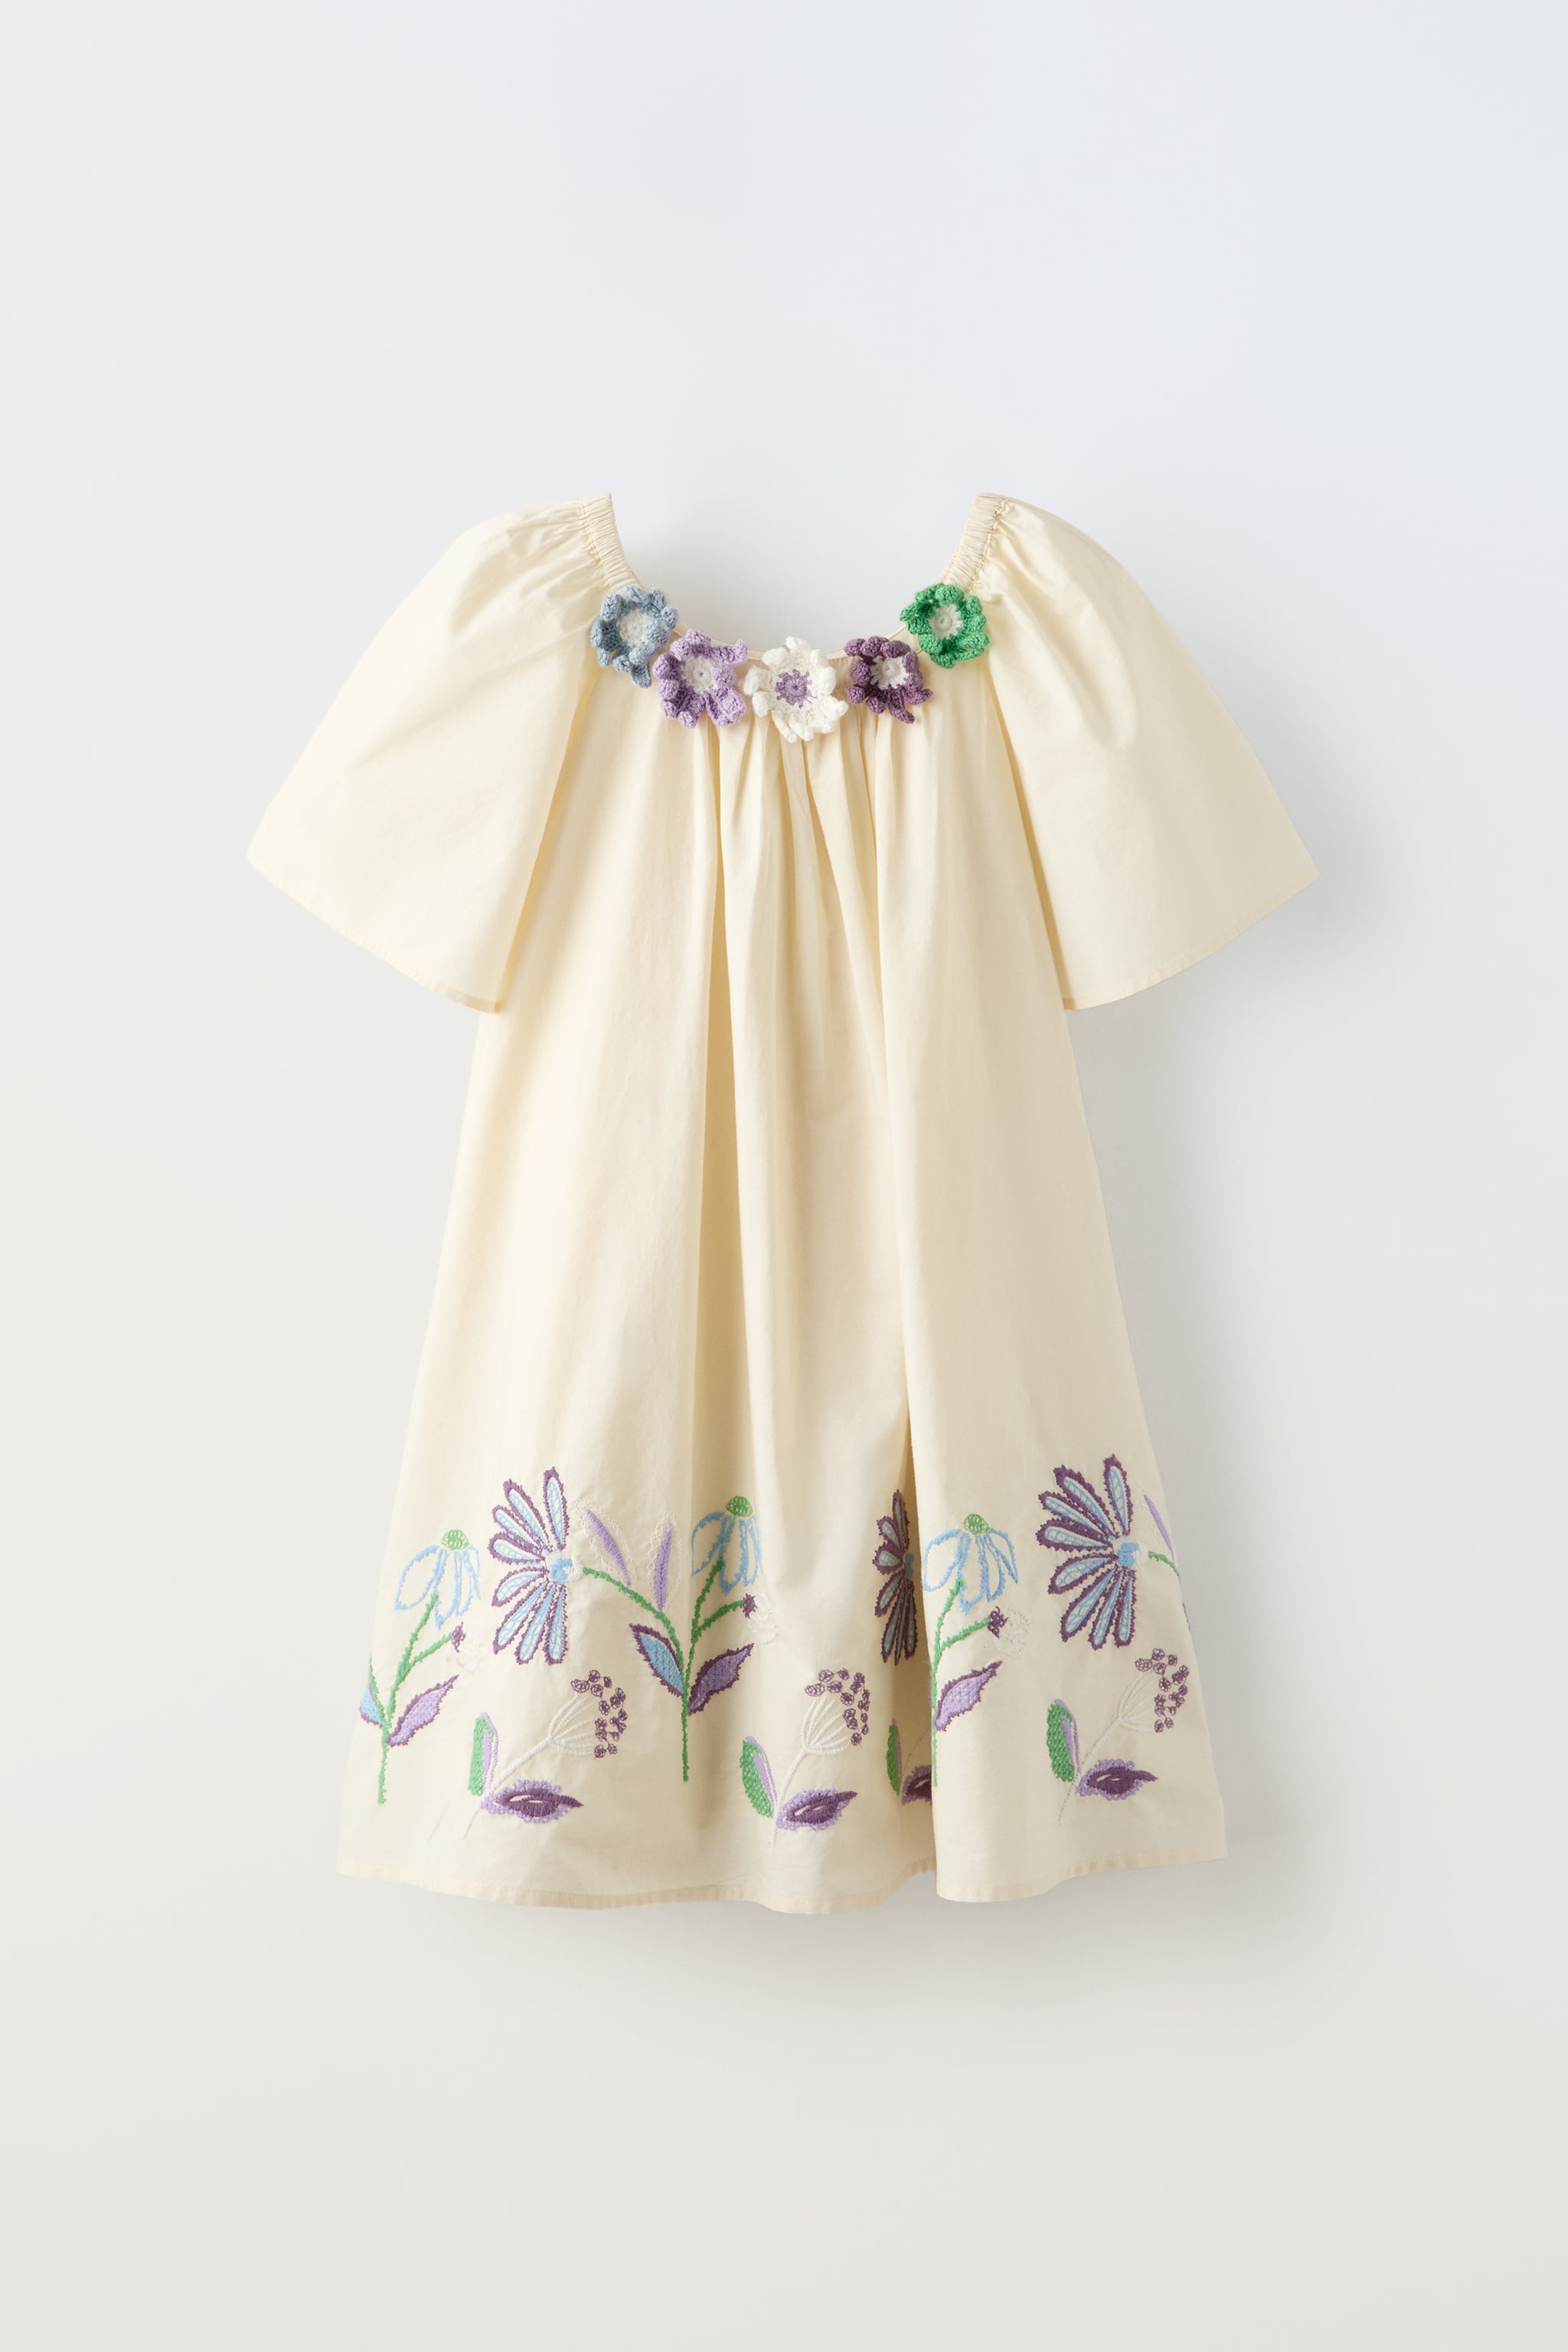 CROCHET FLOWERS EMBROIDERED DRESS